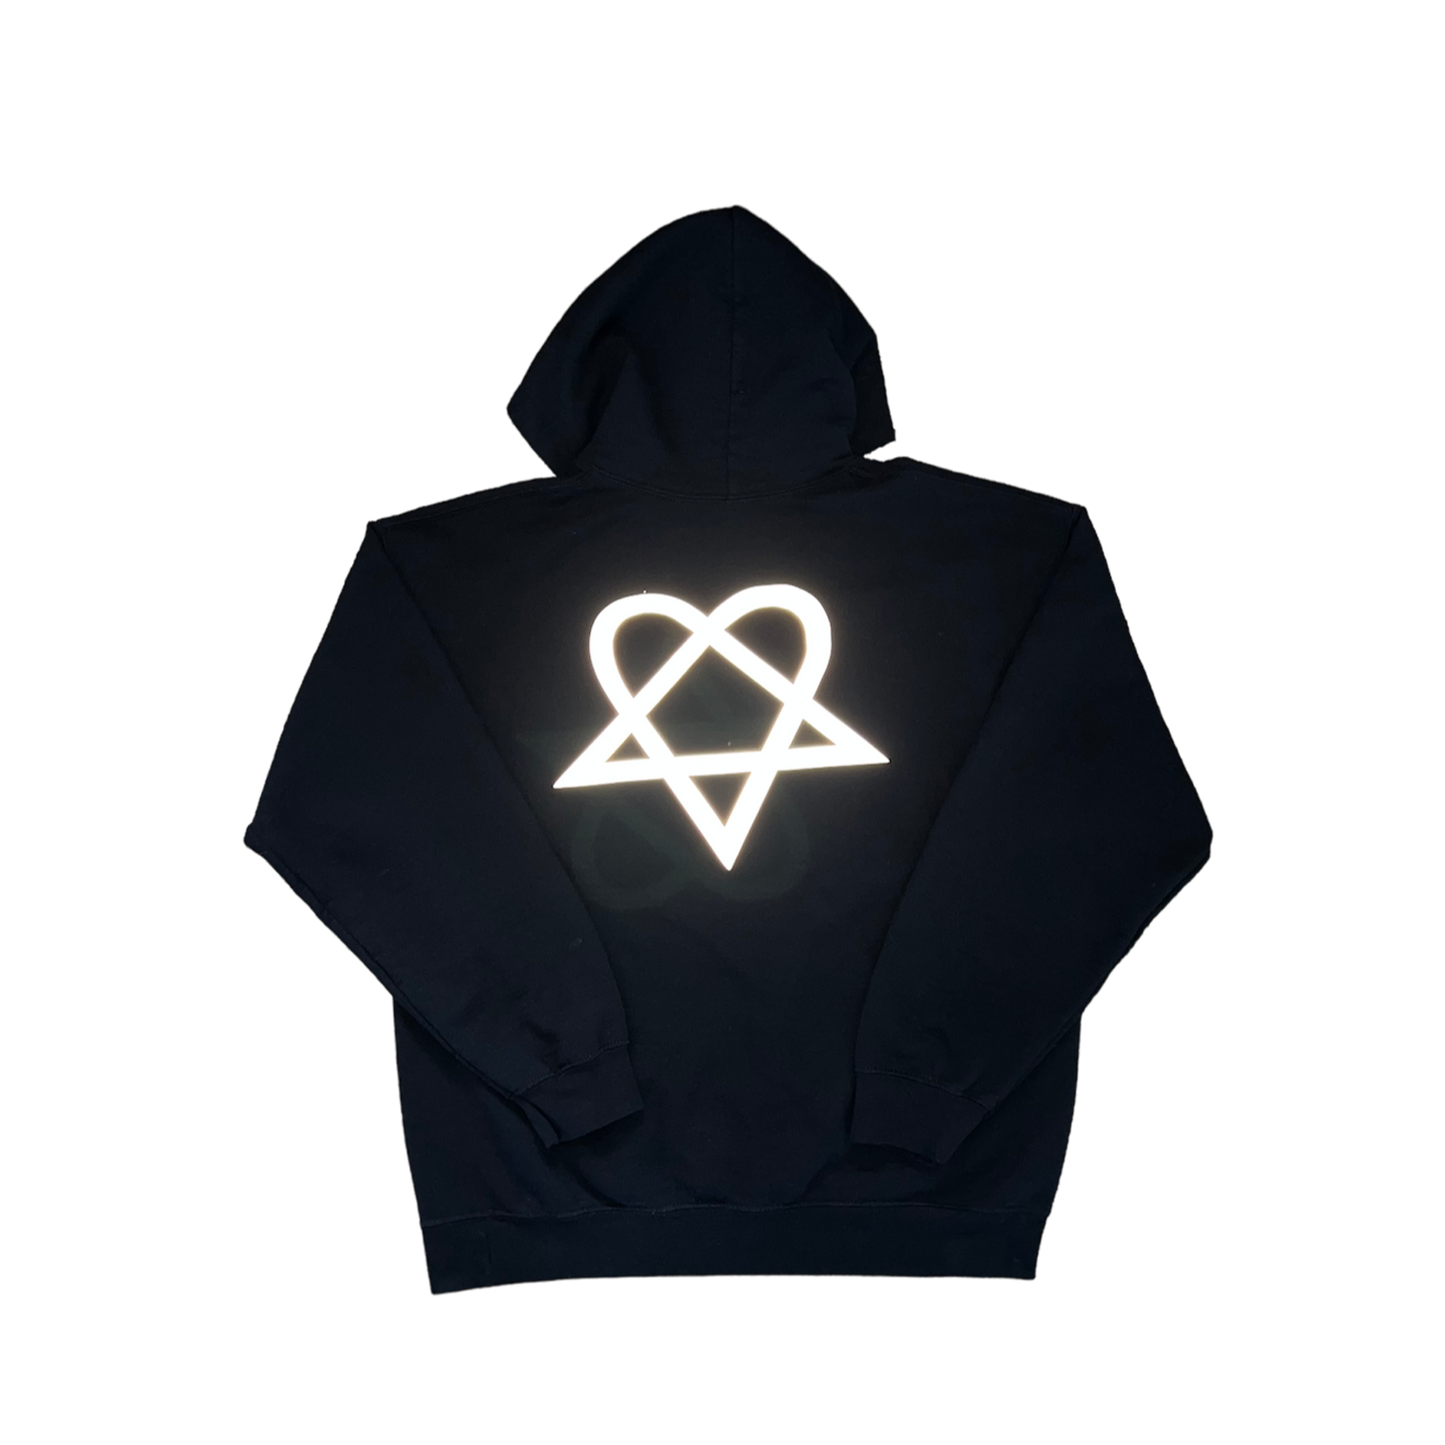 UNKNOWN+ REFLECTIVE HOODIE